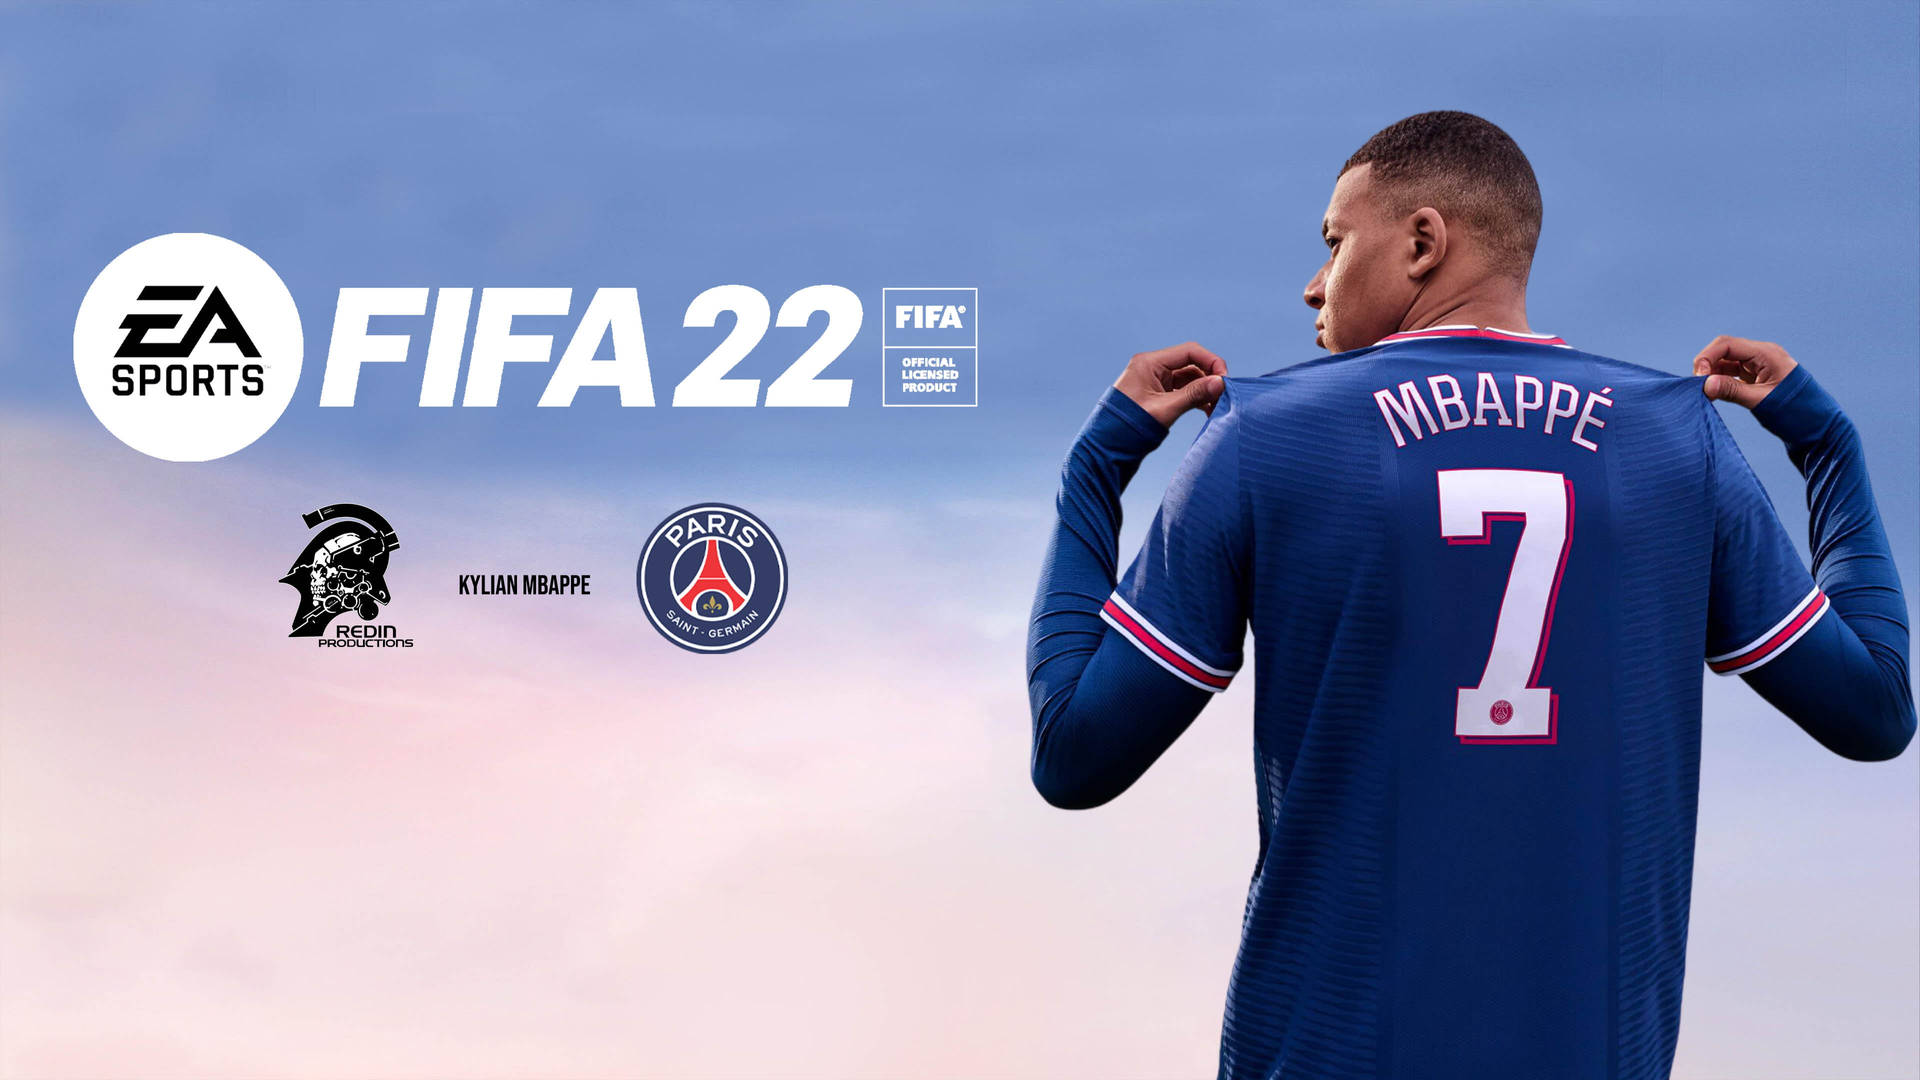 Mbappe Fifa 22 Background